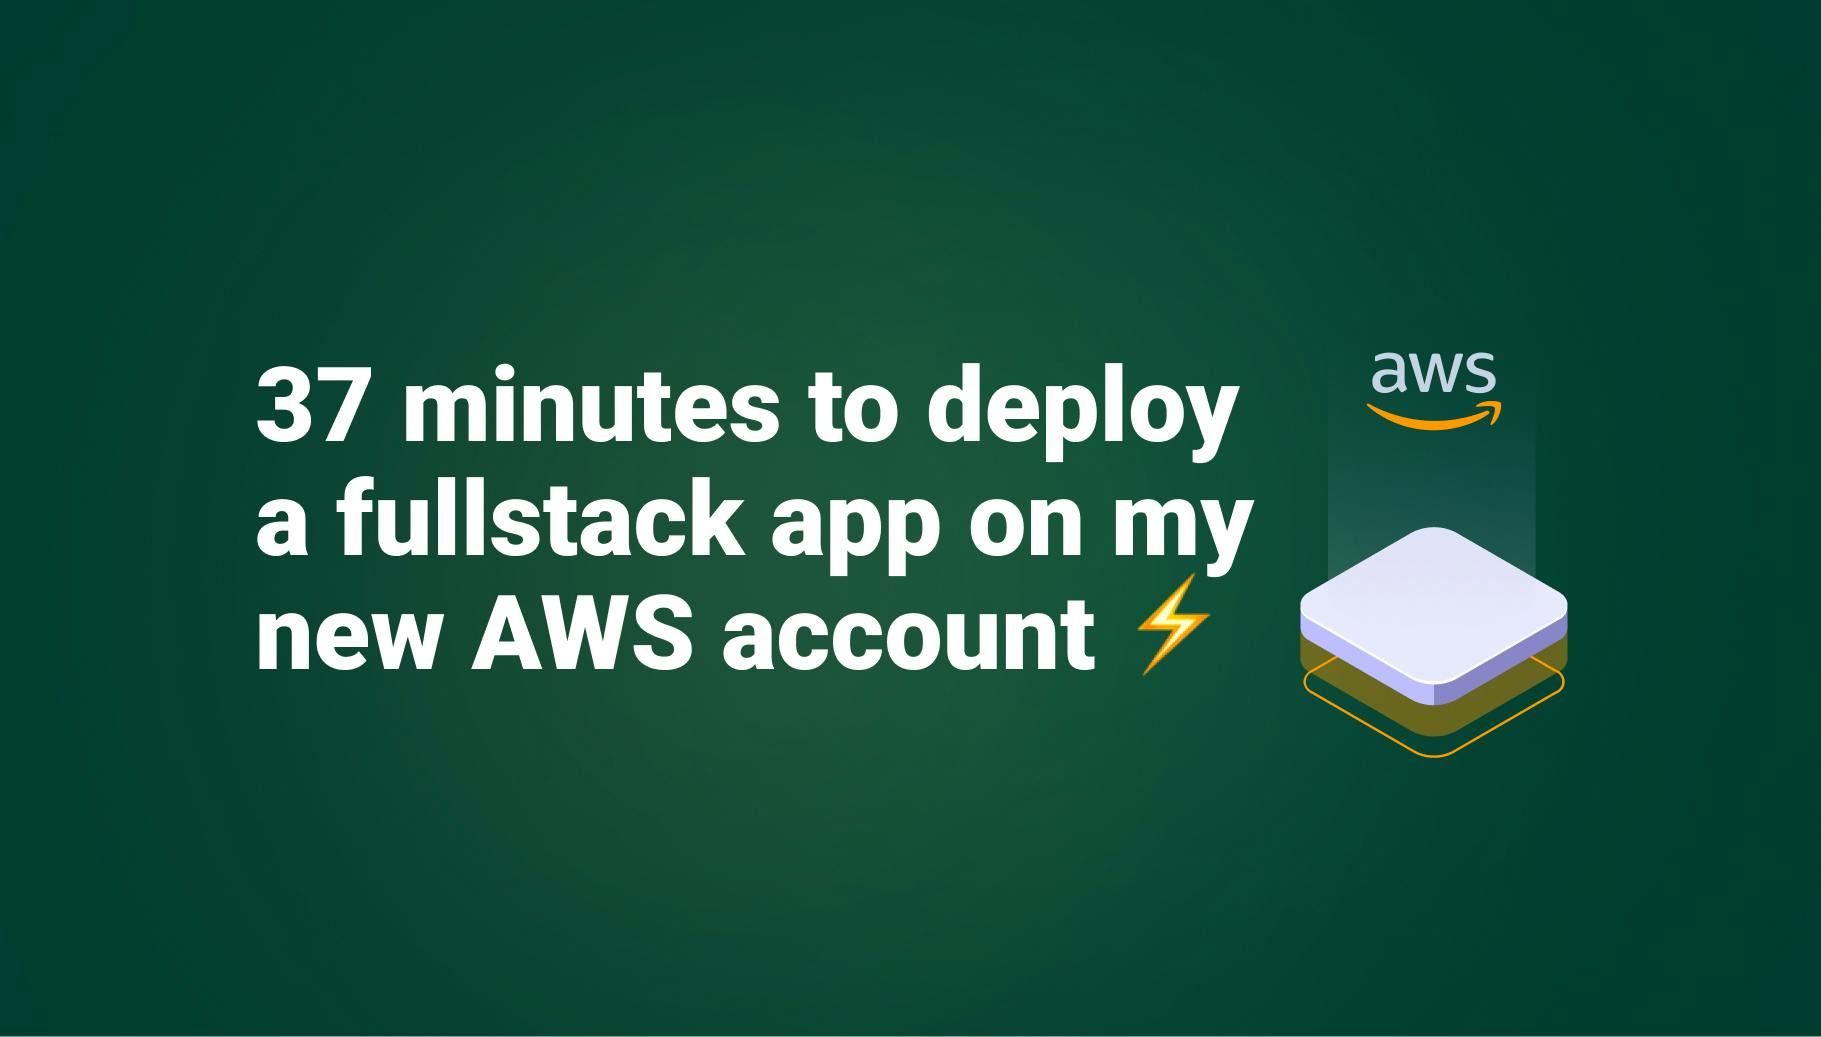 37 minutes to deploy a fullstack app on my new AWS account - Qovery